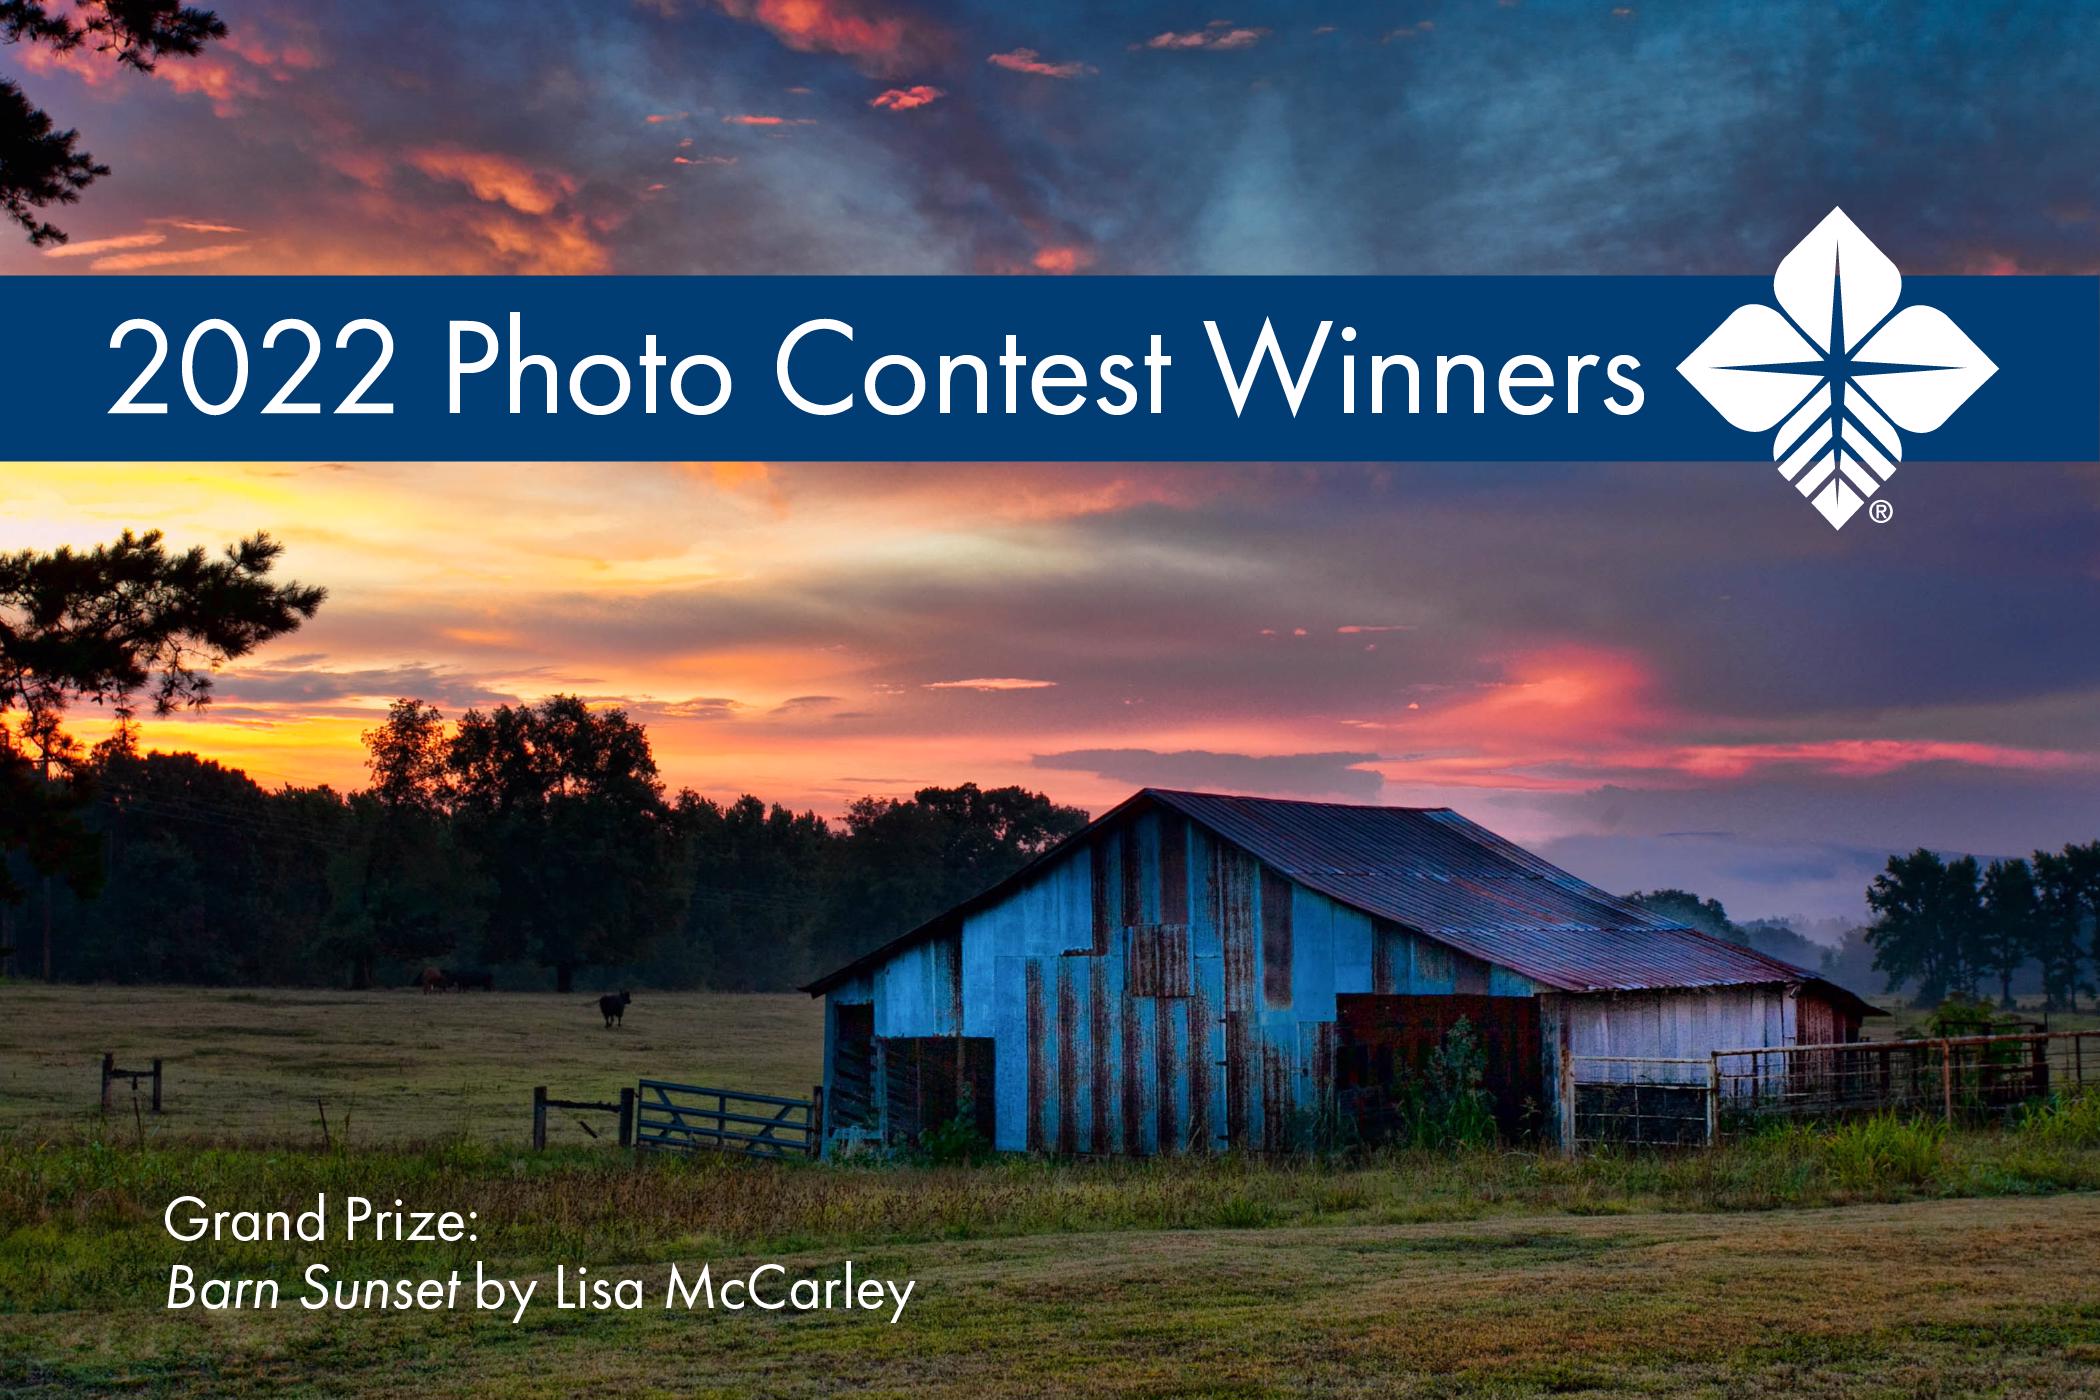 Rusty barn in front of sunset. Top text reads "2022 Photo Contest Winners". Caption reads, "Grand Prize: Barn Sunset by Lisa McCarley"